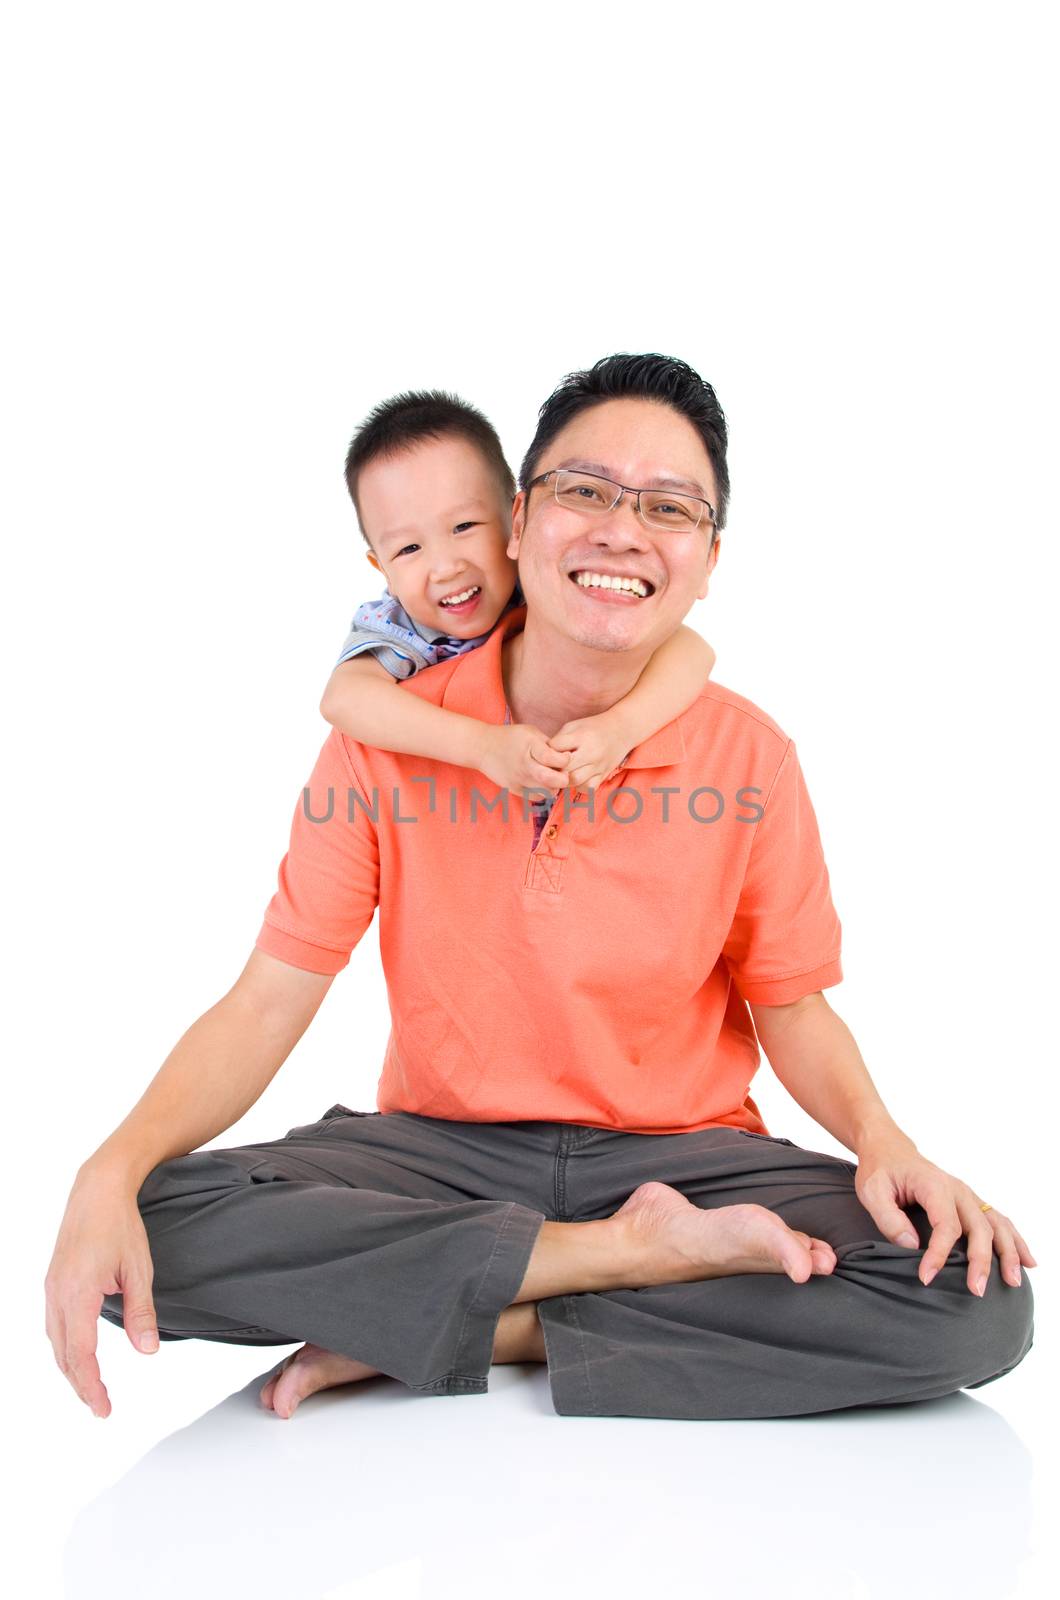 Asian father with his cute son.